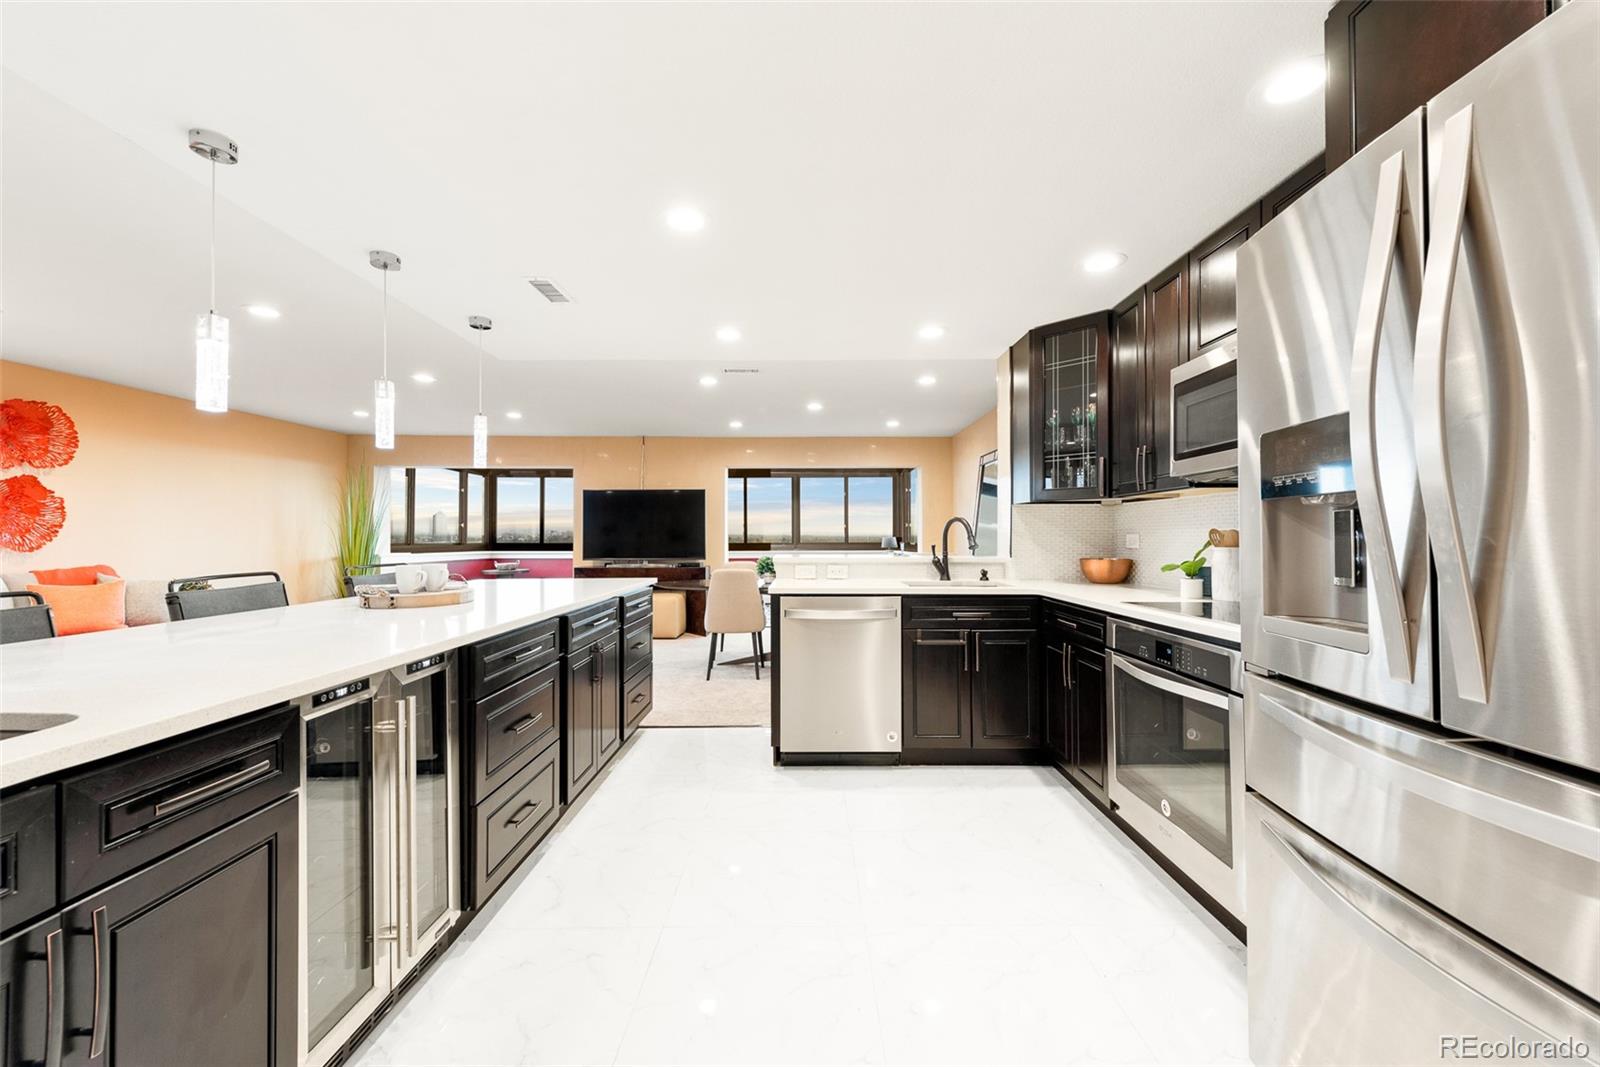 a large kitchen with stainless steel appliances kitchen island granite countertop a large kitchen island and a sink